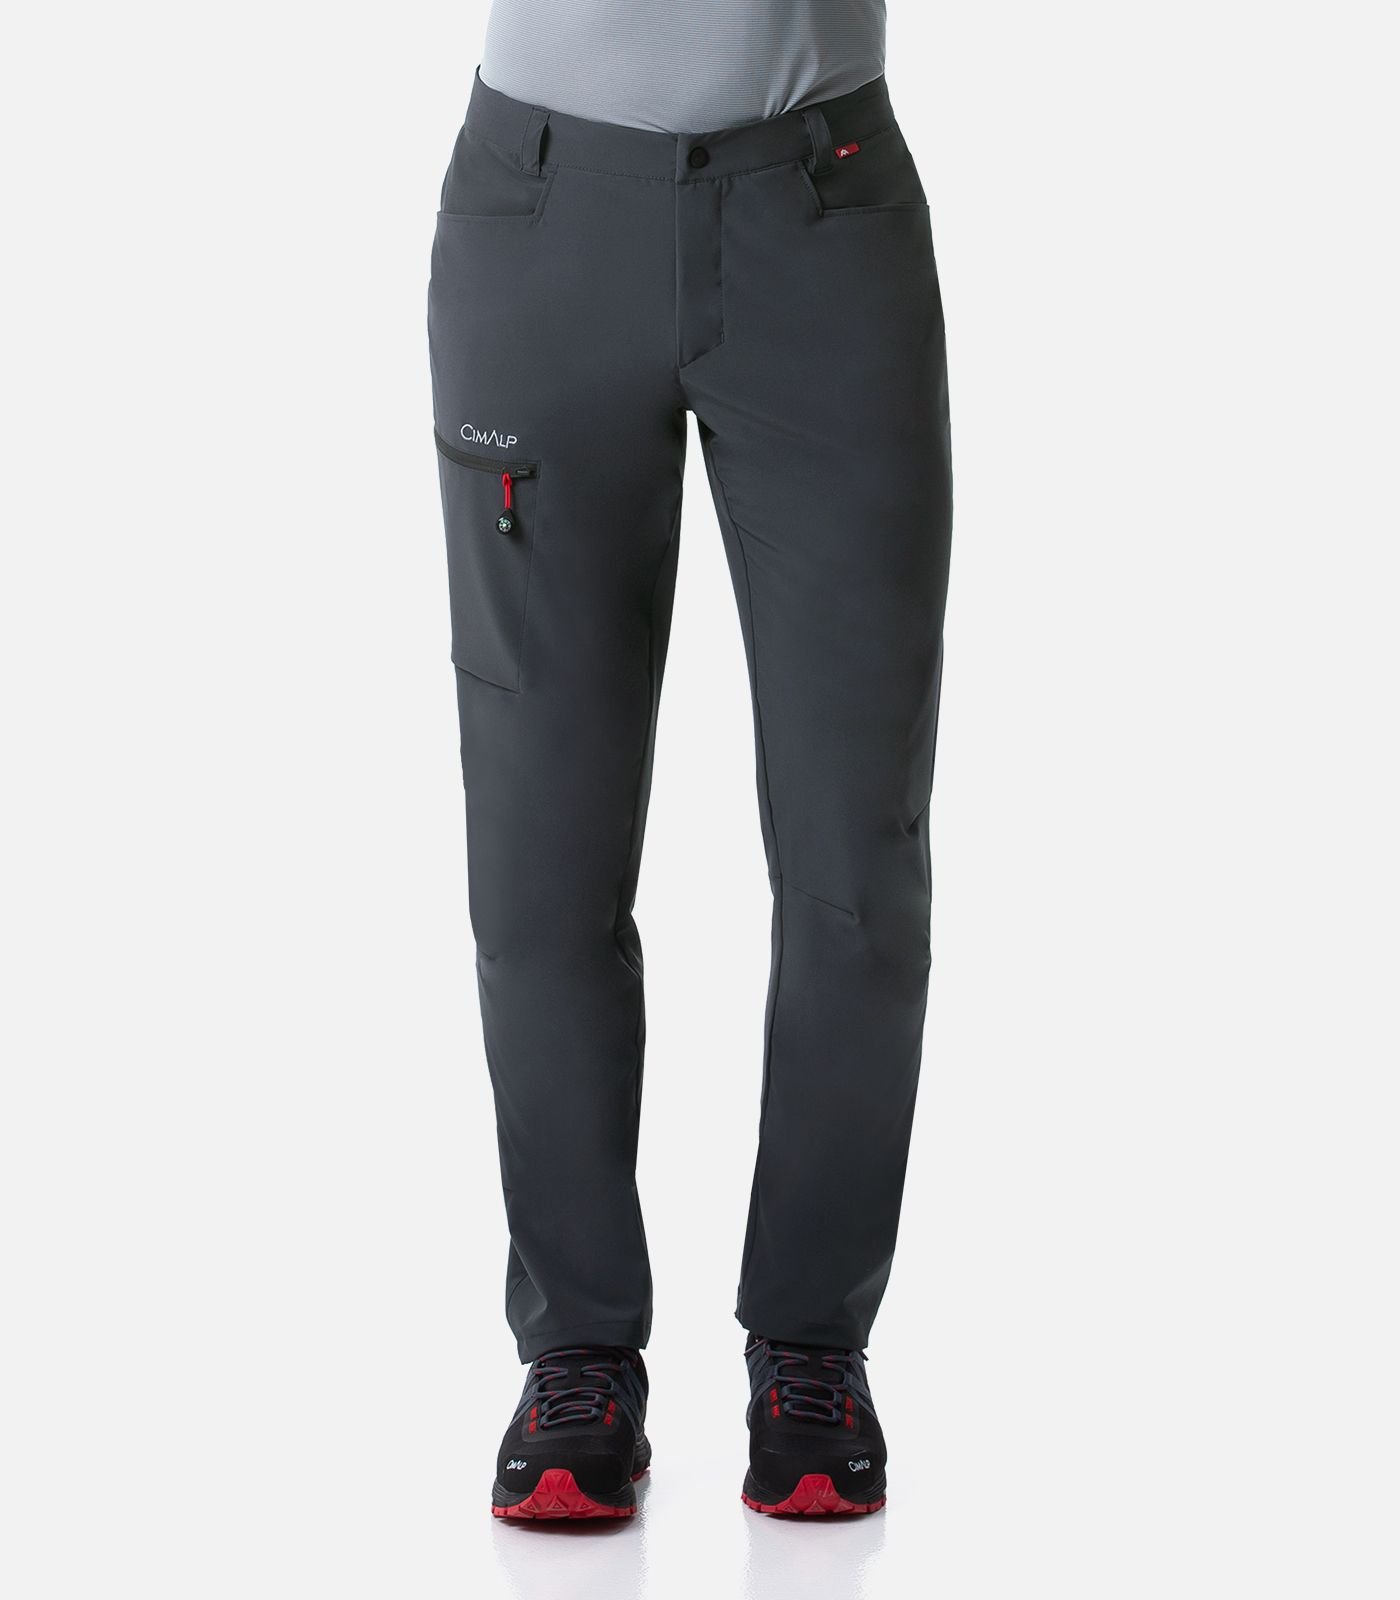 https://static.cimalp.fr/27727-large_default/lightweight-and-functional-hiking-trousers.jpg